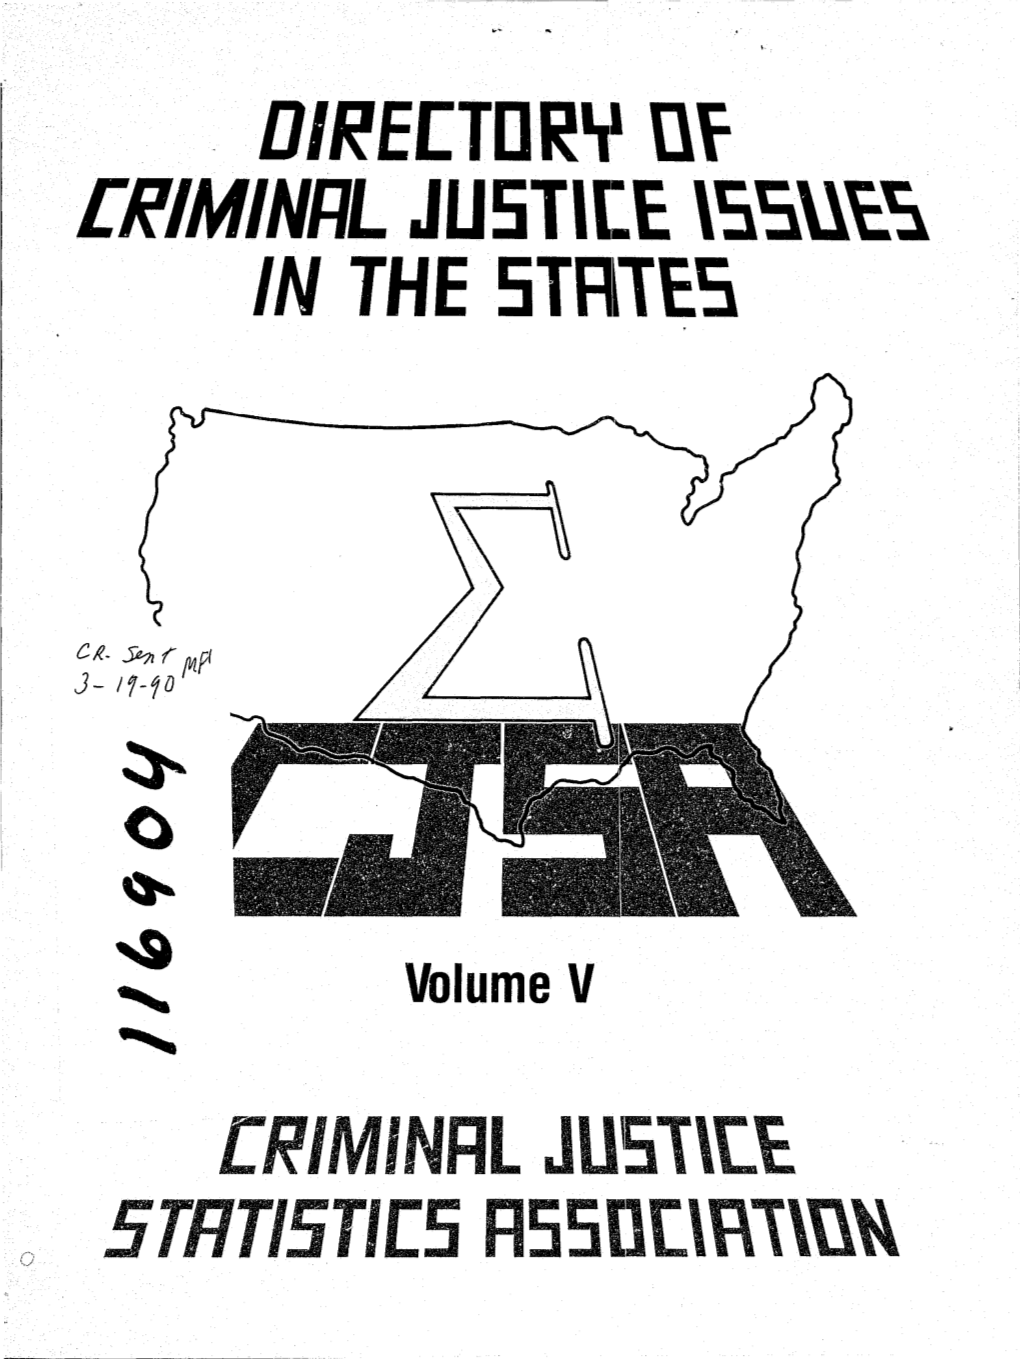 Directory of Criminal Justice Issues in the States